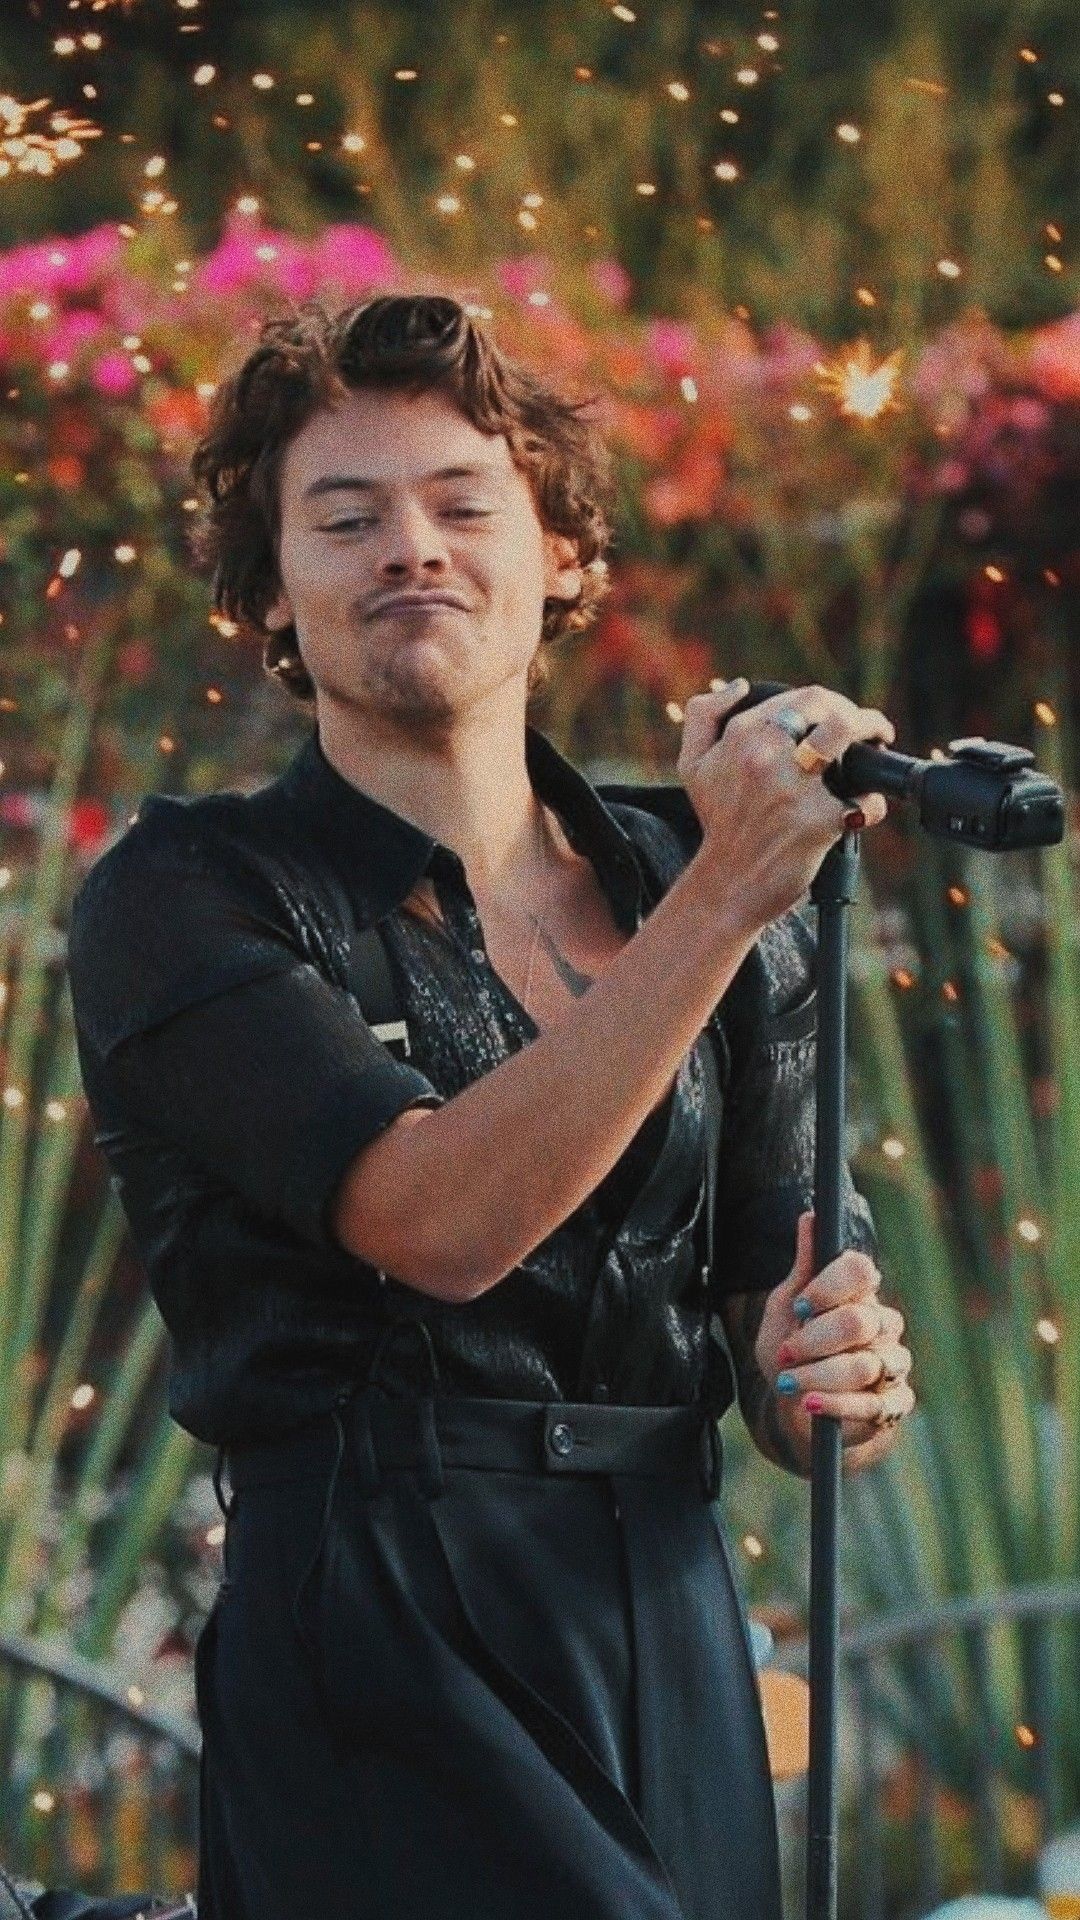 Harry Styles iPhone Wallpaper with high-resolution 1080x1920 pixel. You can use this wallpaper for your iPhone 5, 6, 7, 8, X, XS, XR backgrounds, Mobile Screensaver, or iPad Lock Screen - Harry Styles